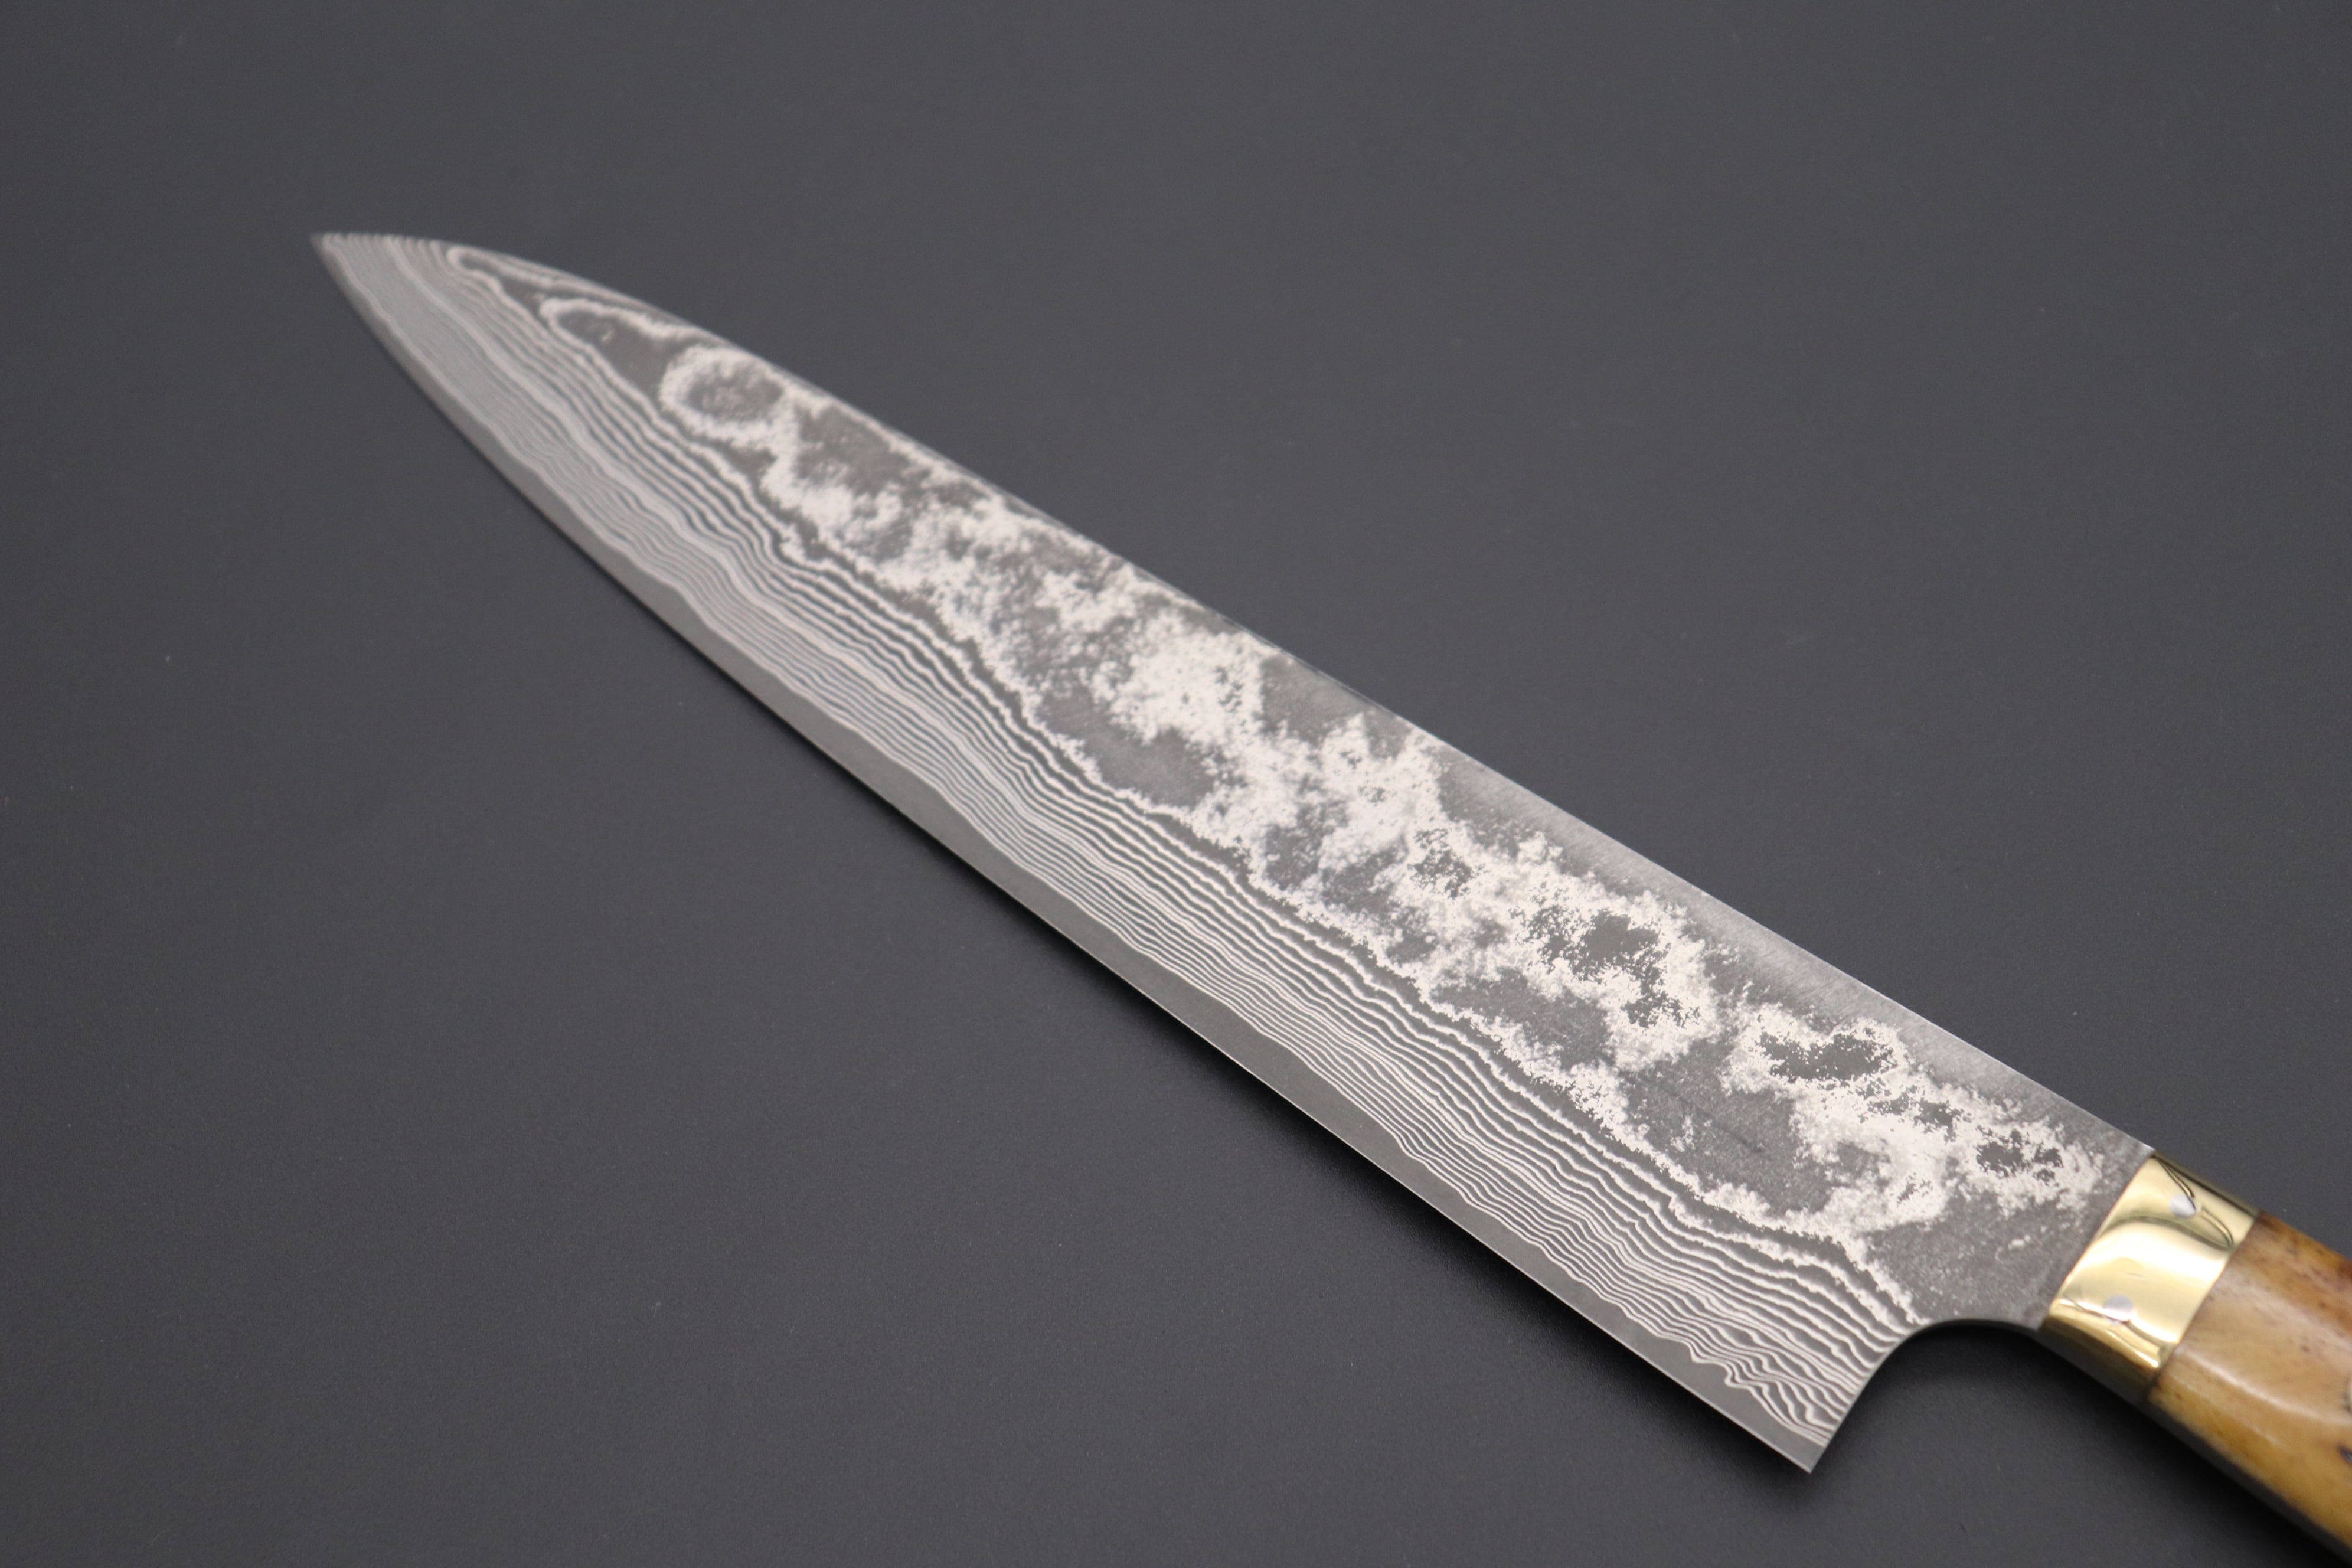 Handmade Chef Knives, Forged Damascus Steel, Super Sharp and